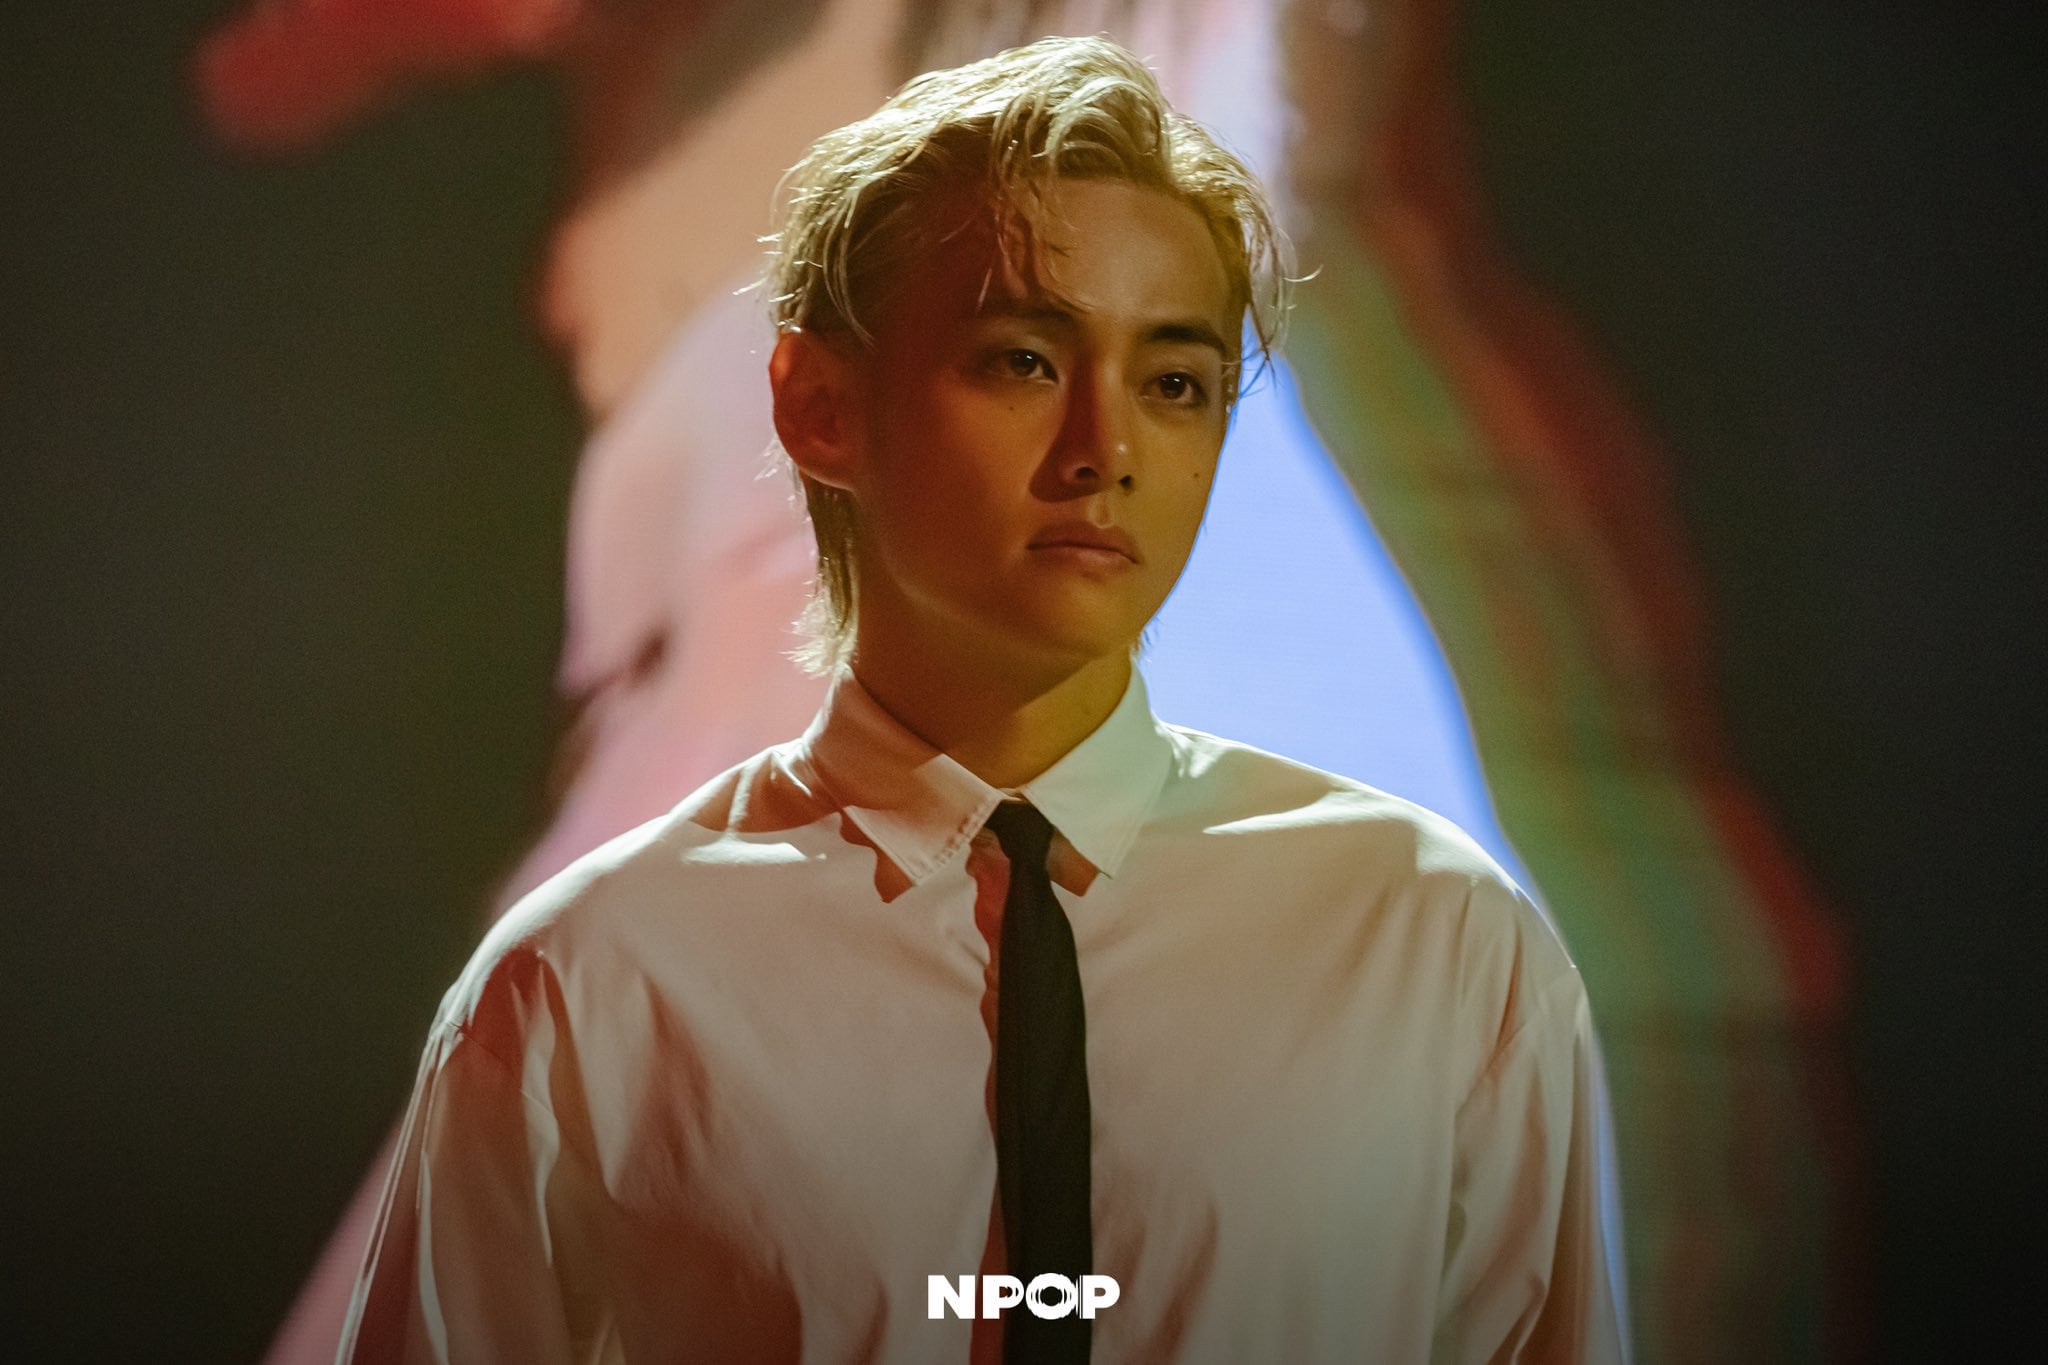 230909 NPOP Official: Photos of V from his NPOP SPECIAL EP stages